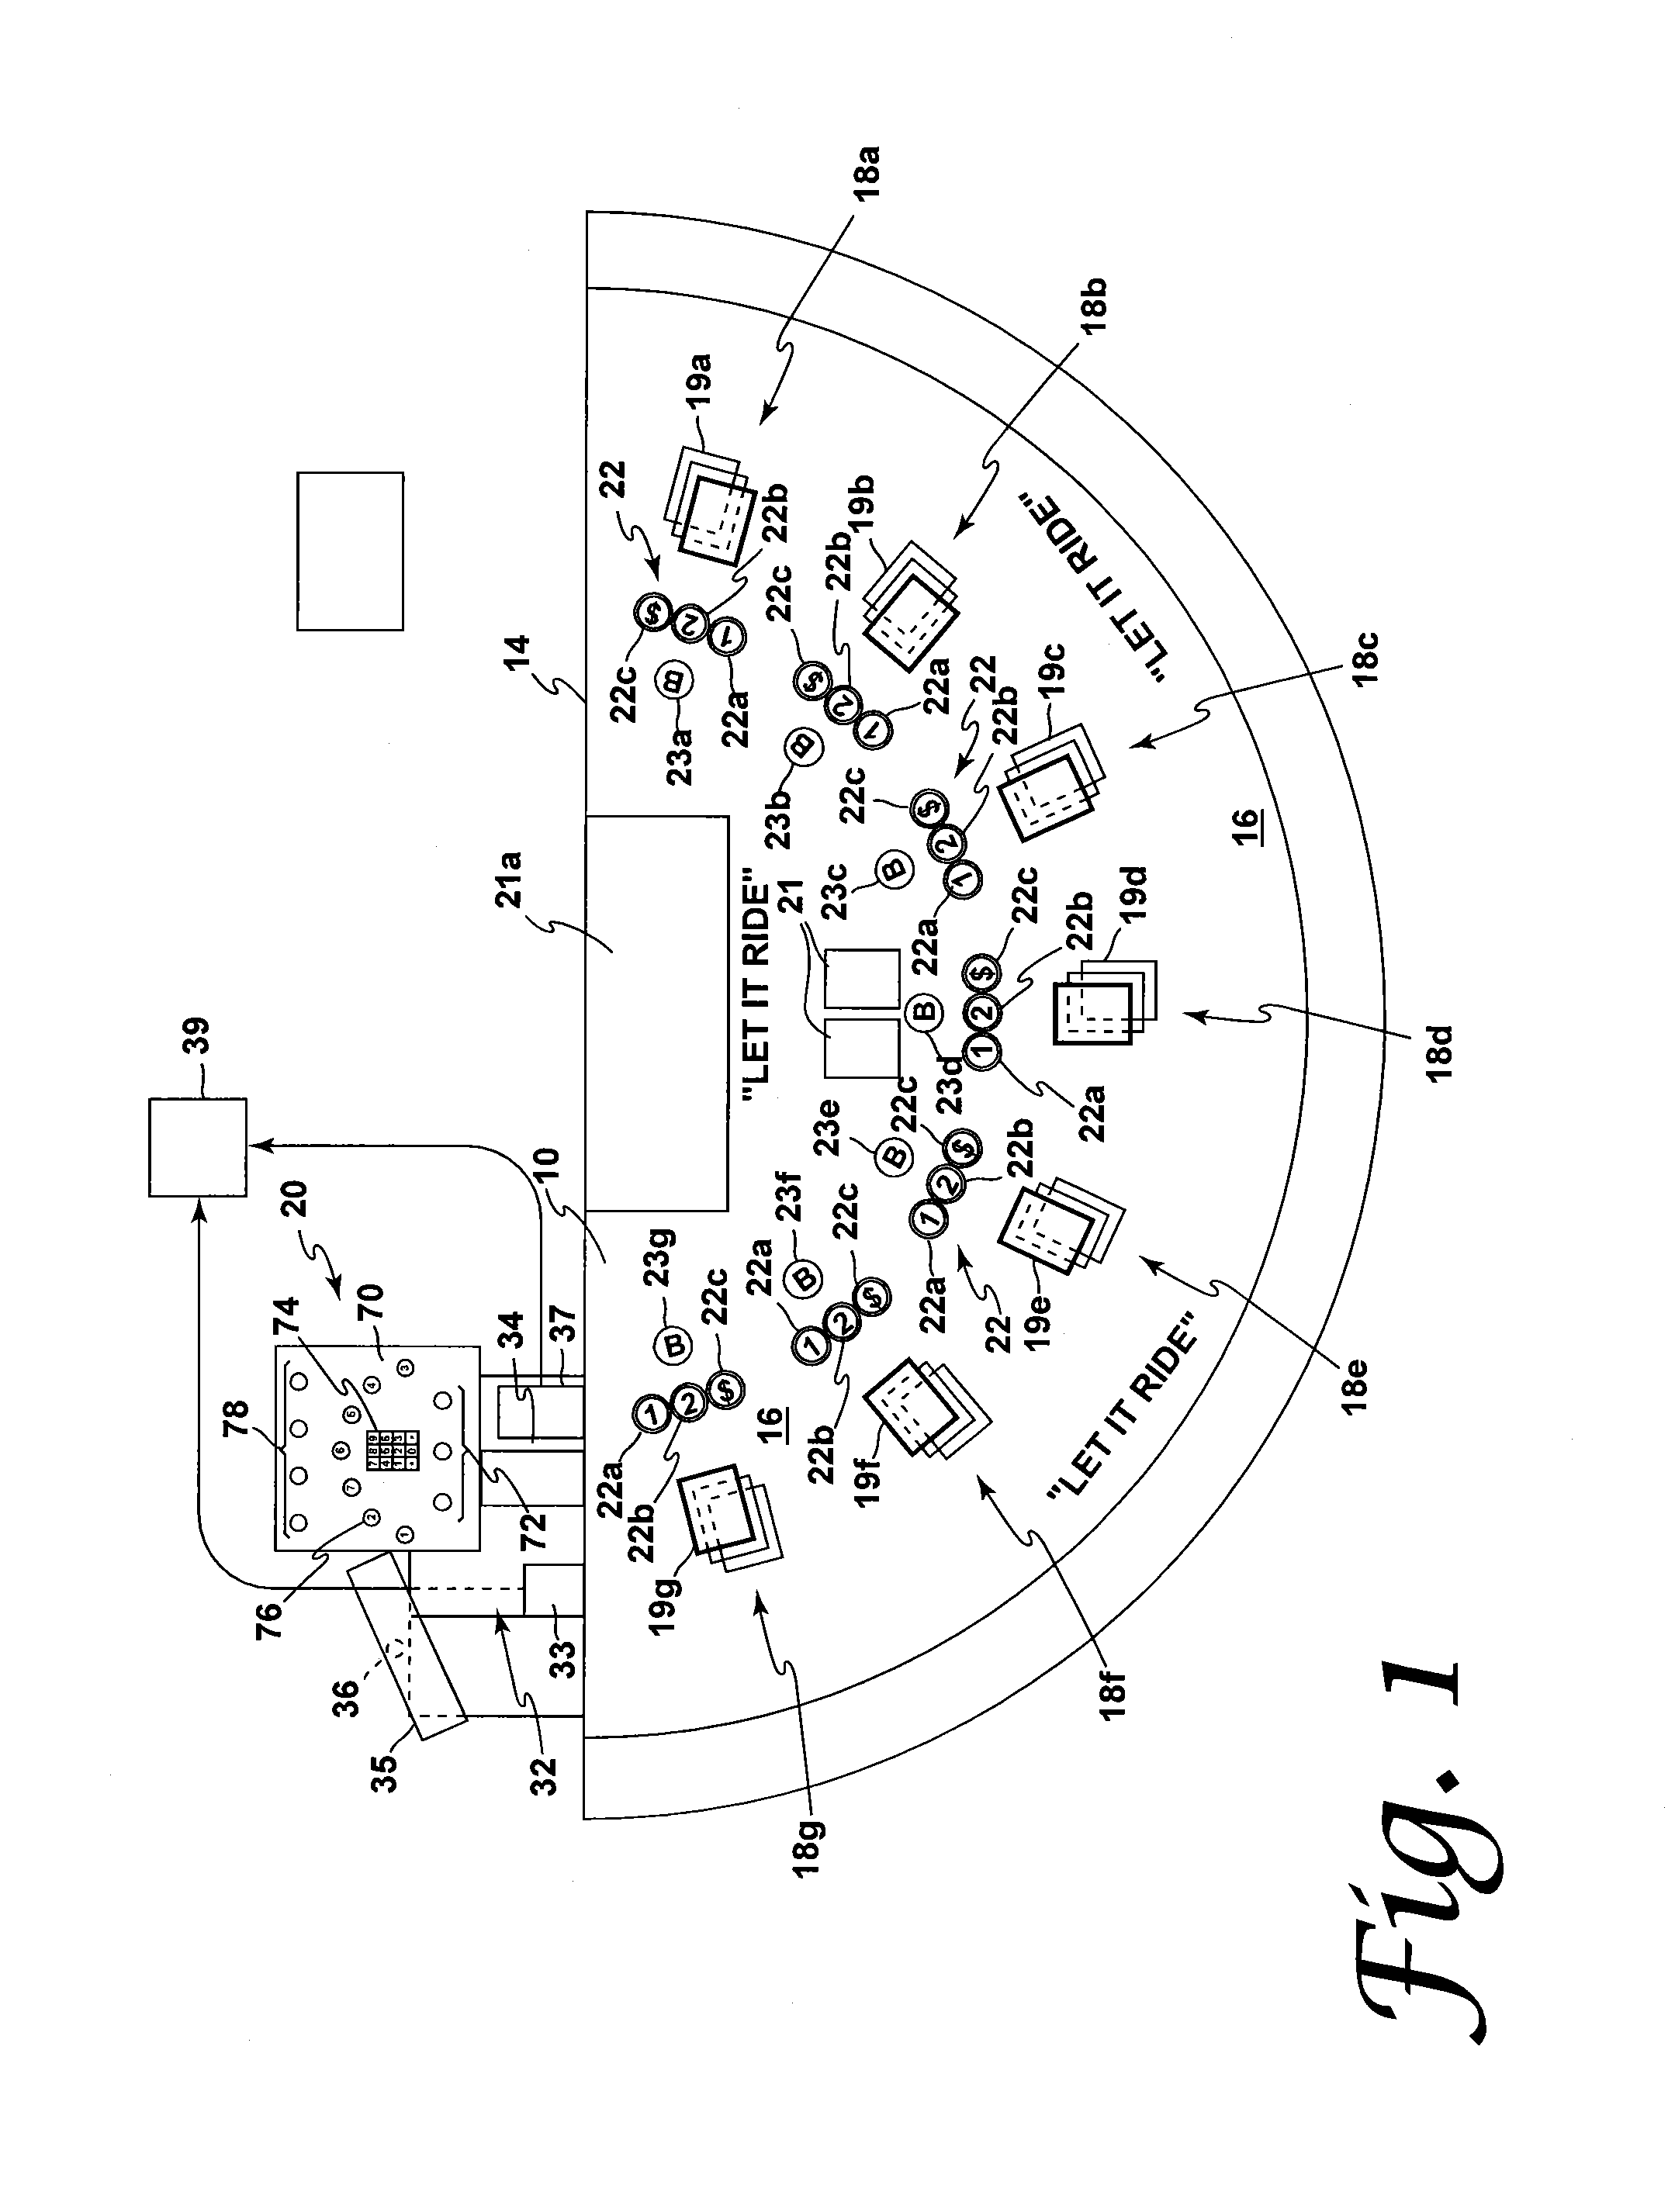 Method and apparatus for using upstream communication in a card shuffler